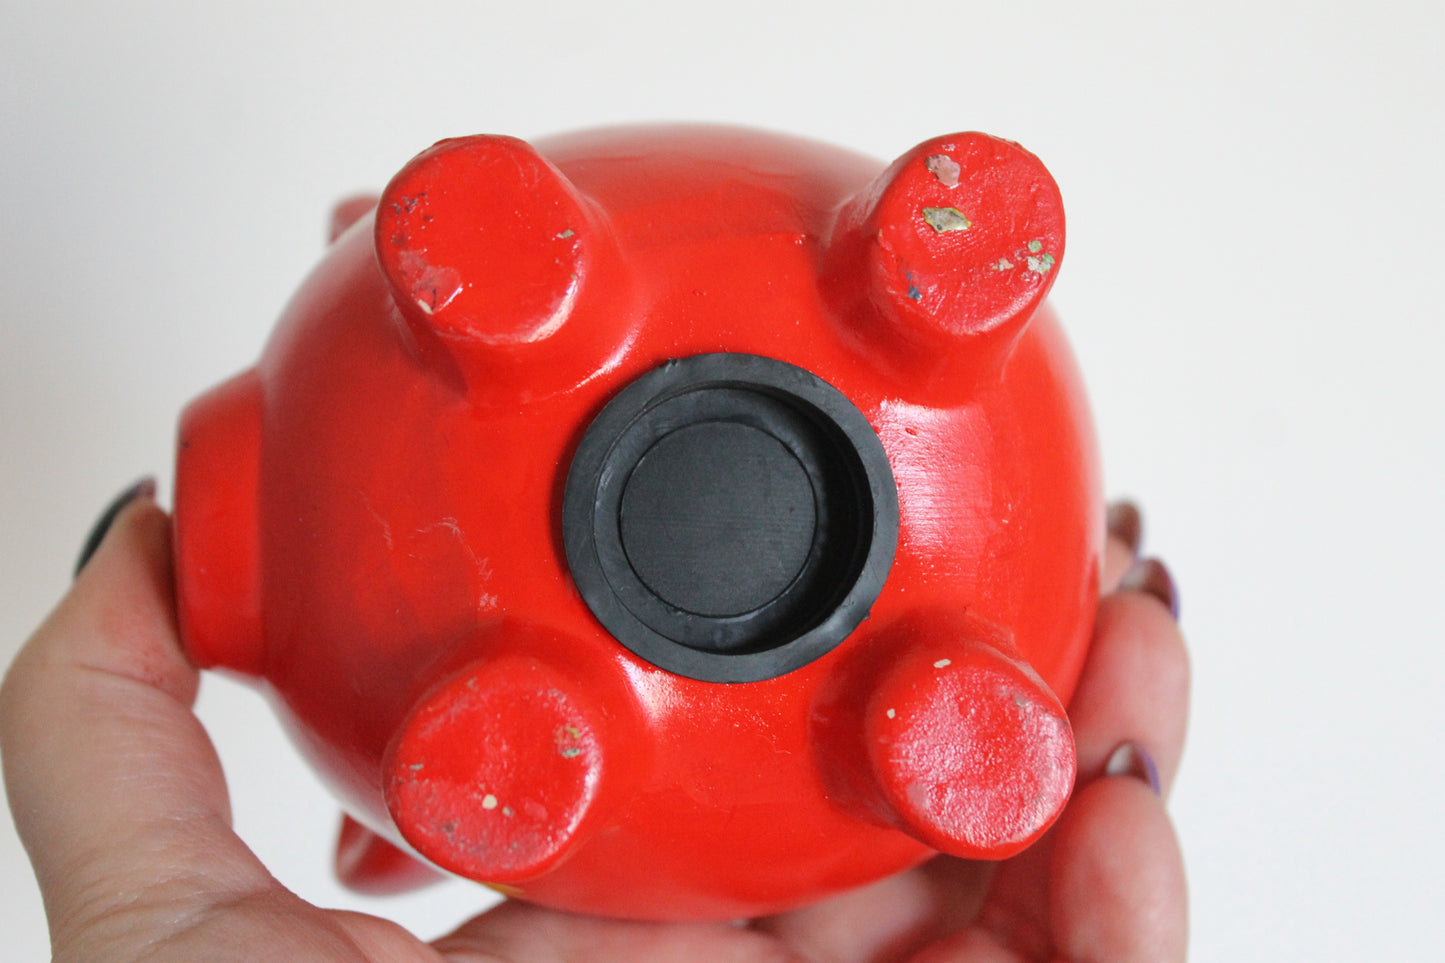 Porcelain red Piggy Bank 4 inches - Vintage Piggy Bank - Home decor - Made in Germany - 1990-2000s